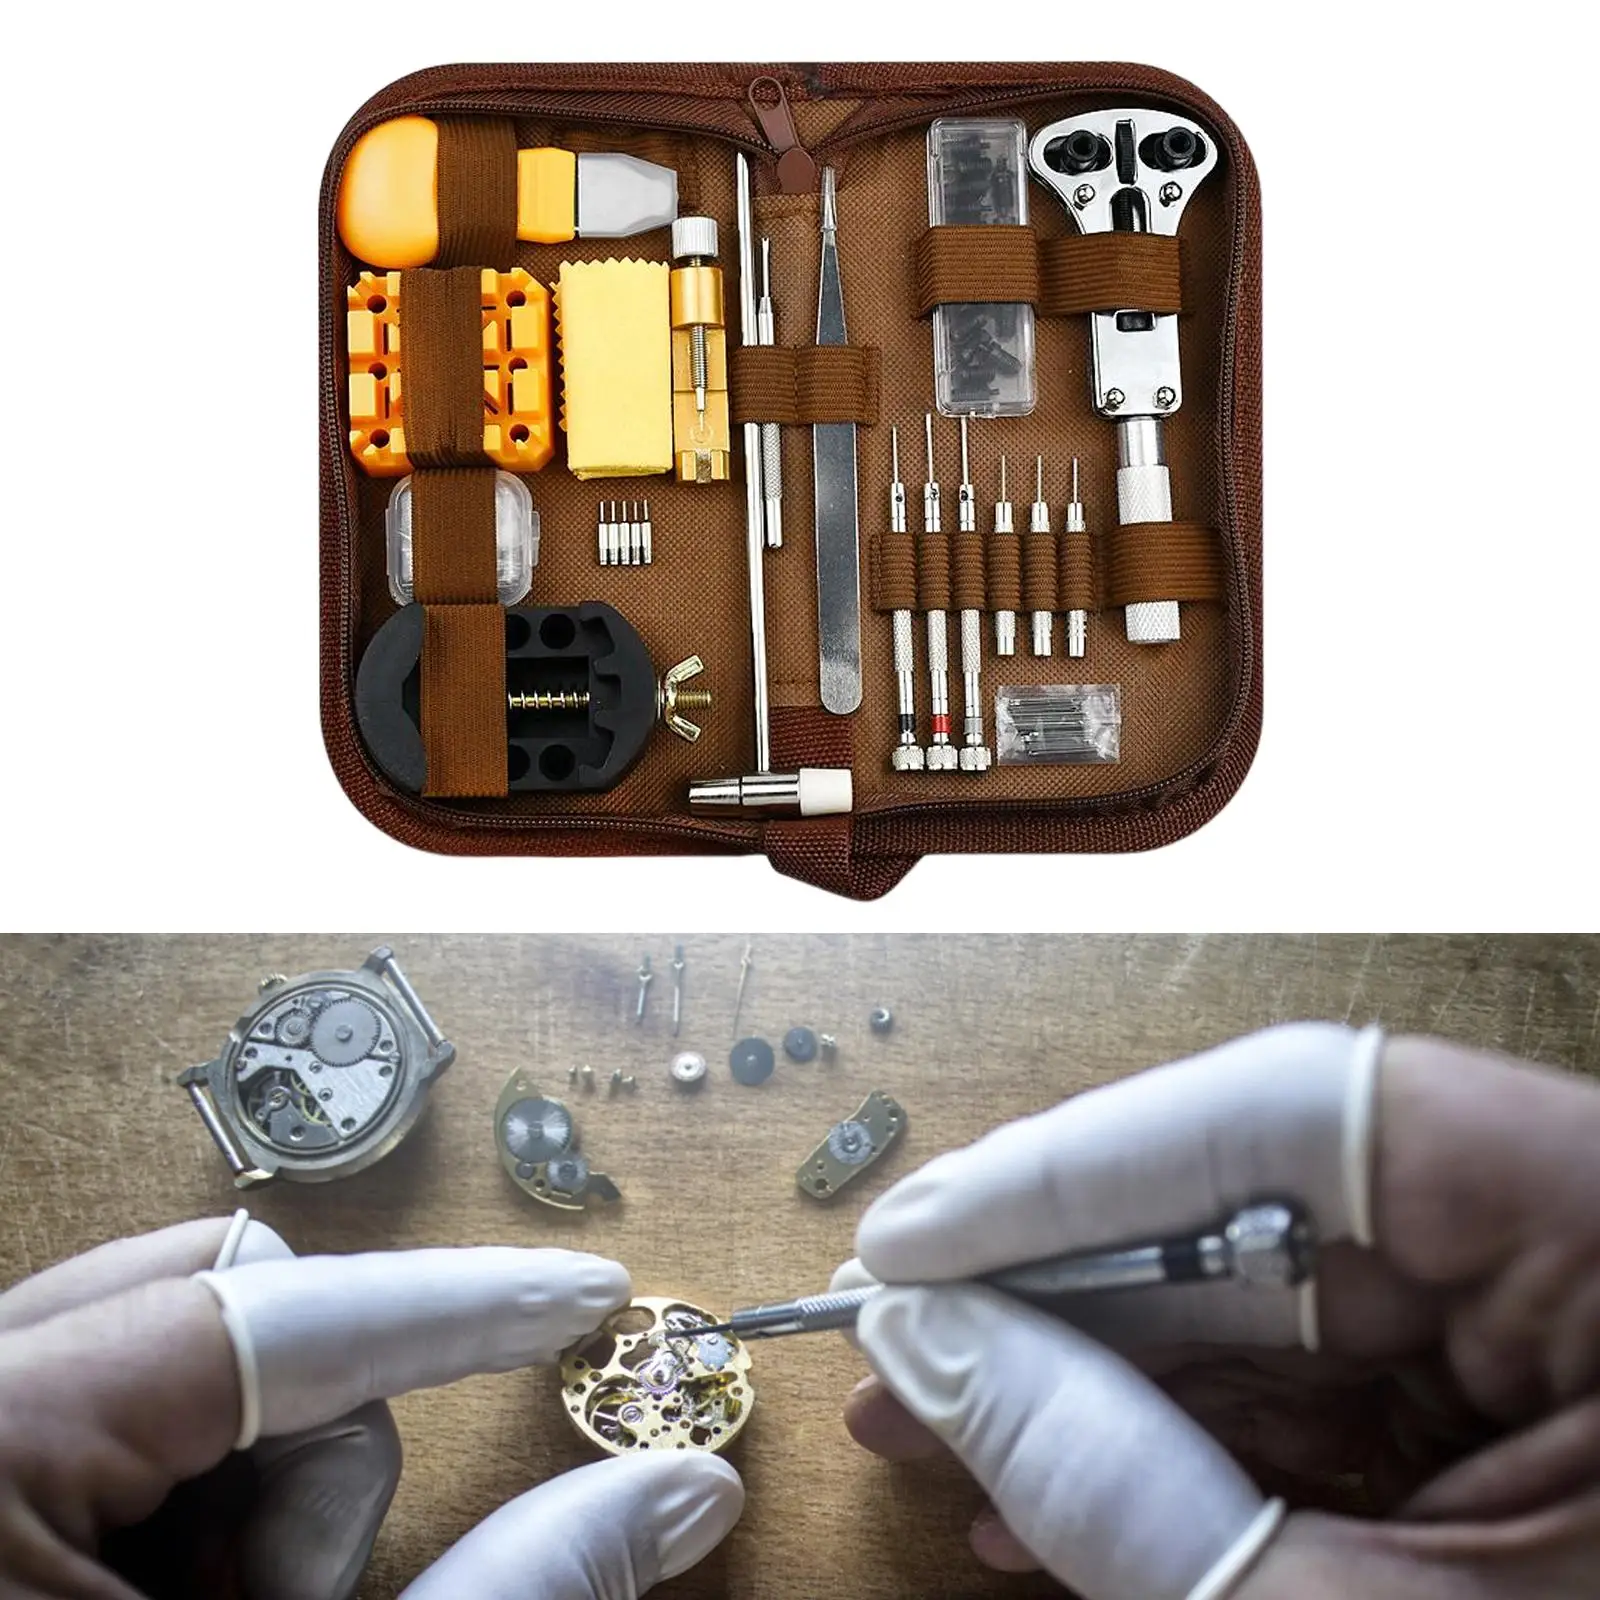 168x Watch Repair Tool Kit Spring Bar Carrying Case Extra Pins Watch Link Removal Tool Back Removal Watch Battery Replacement